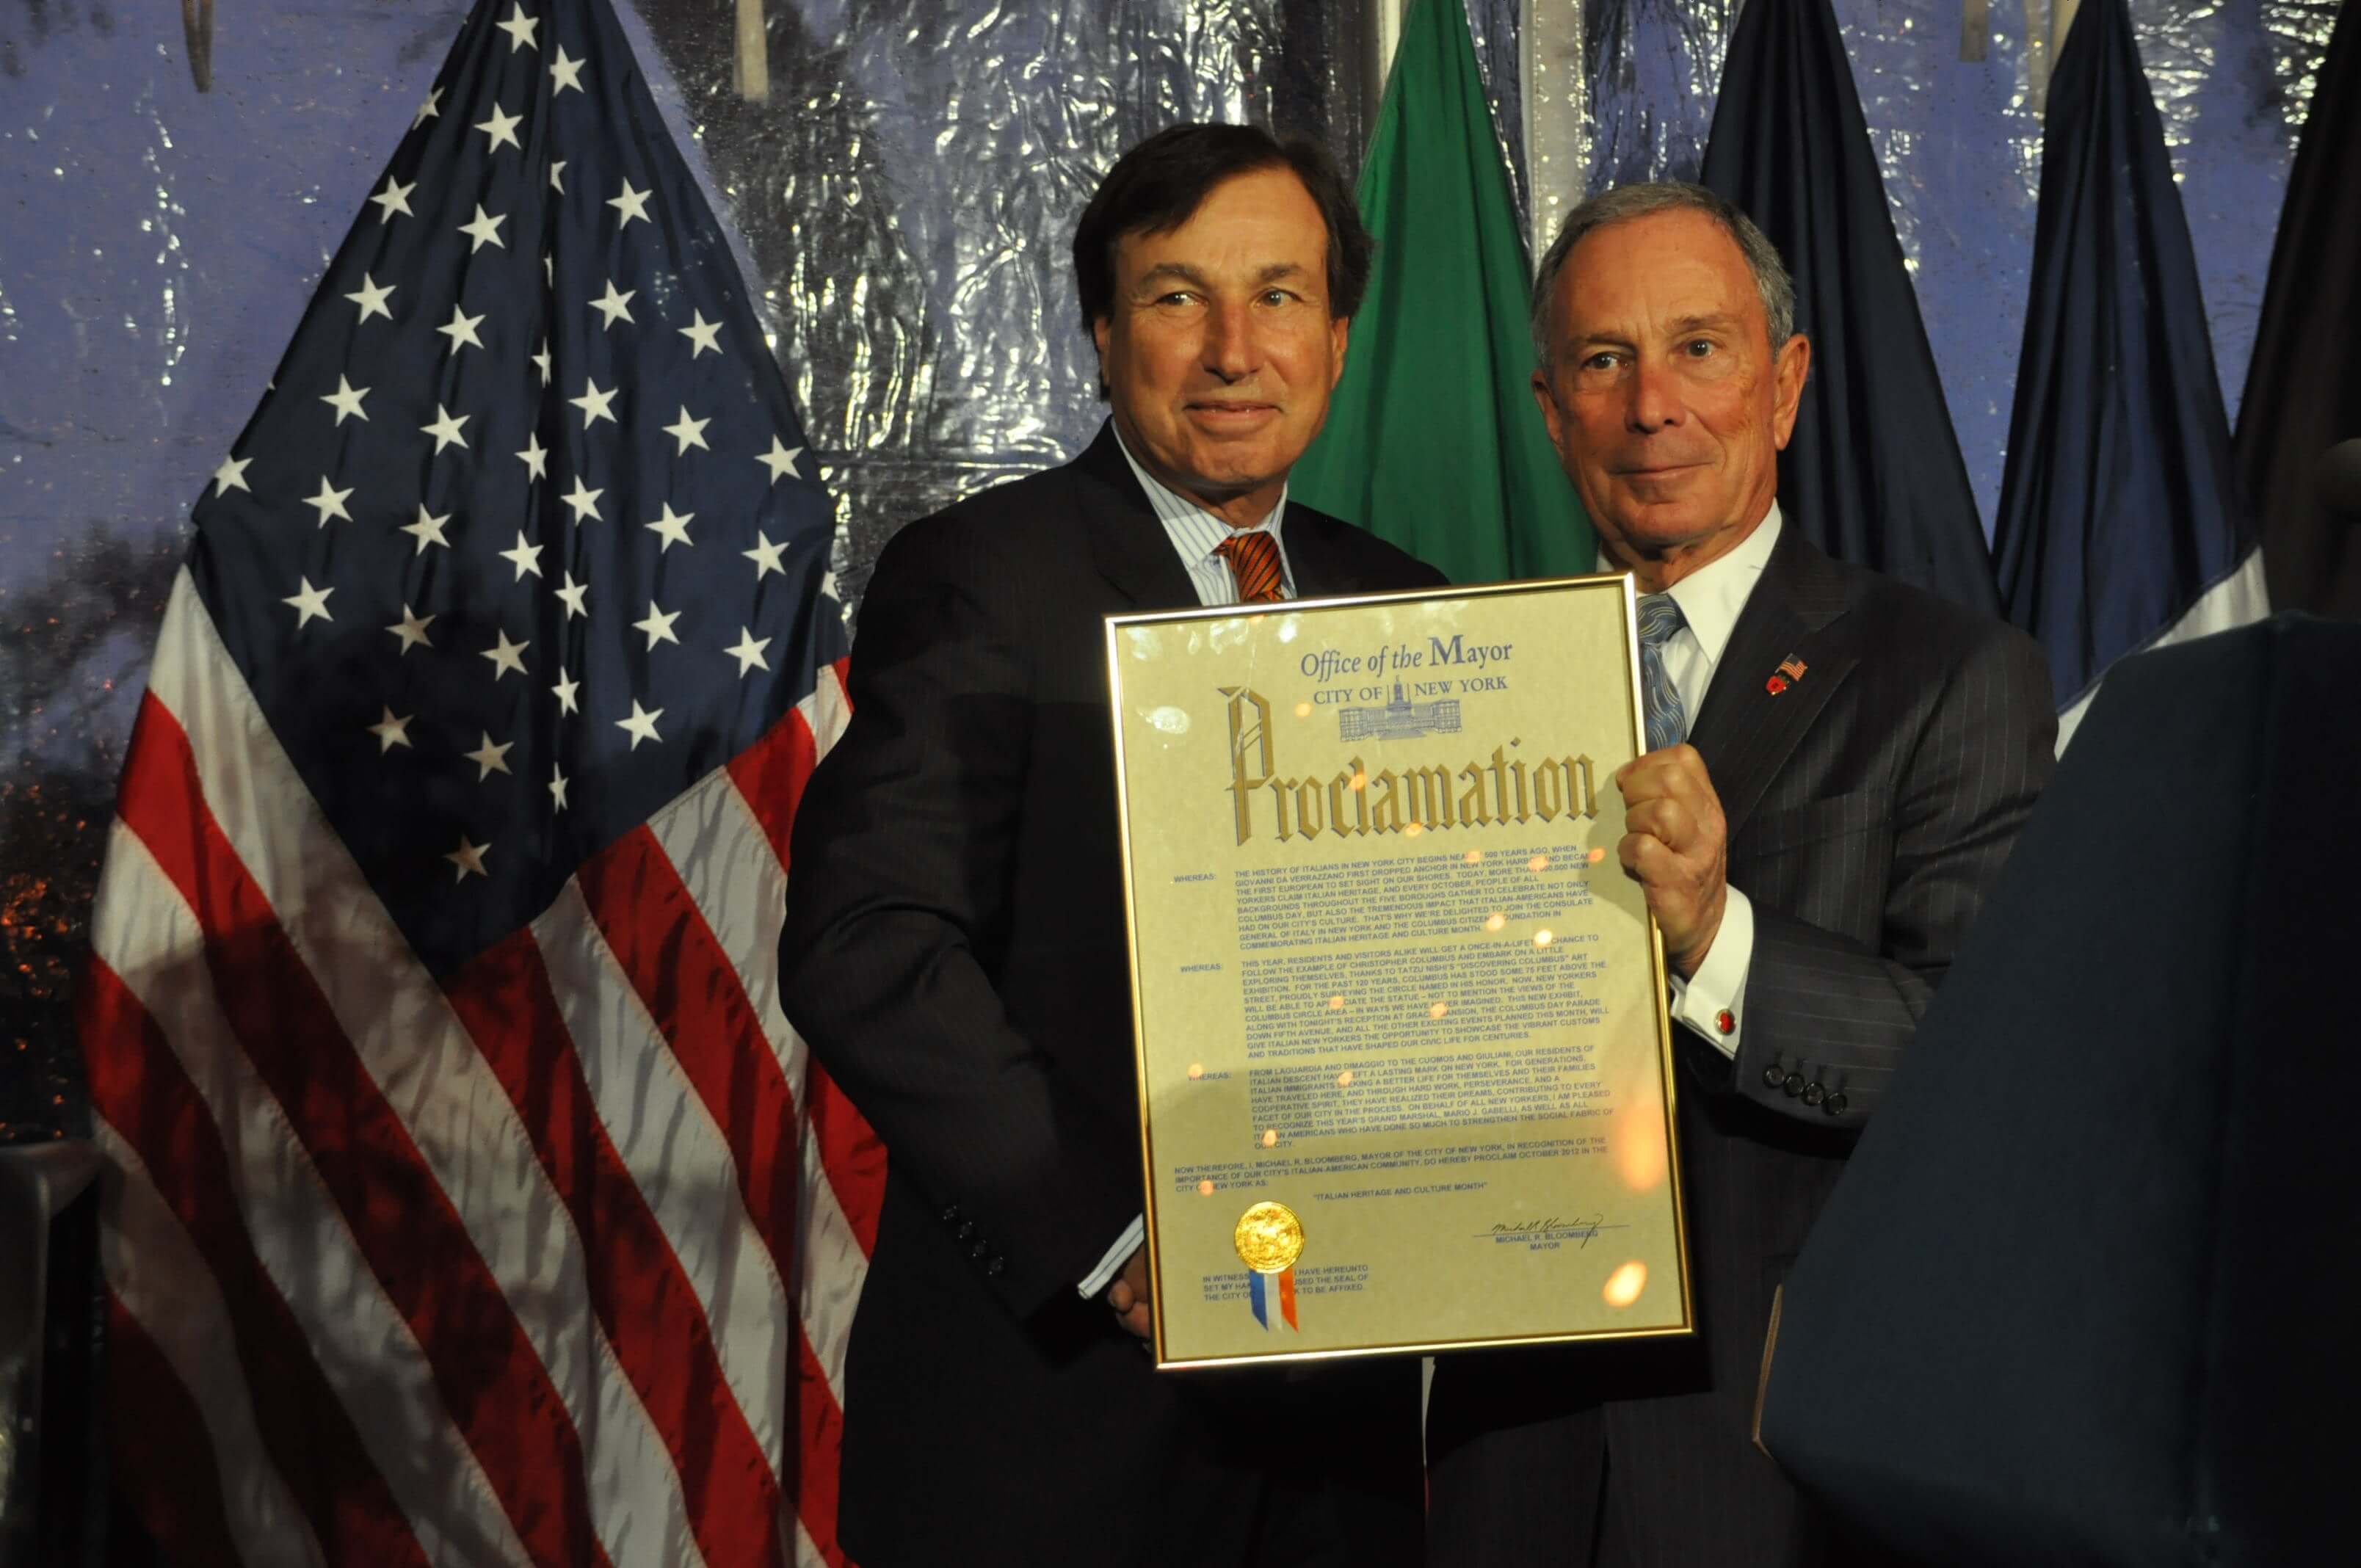 Photo: The Forum Group presented with proclamation from Mayor Bloomberg.